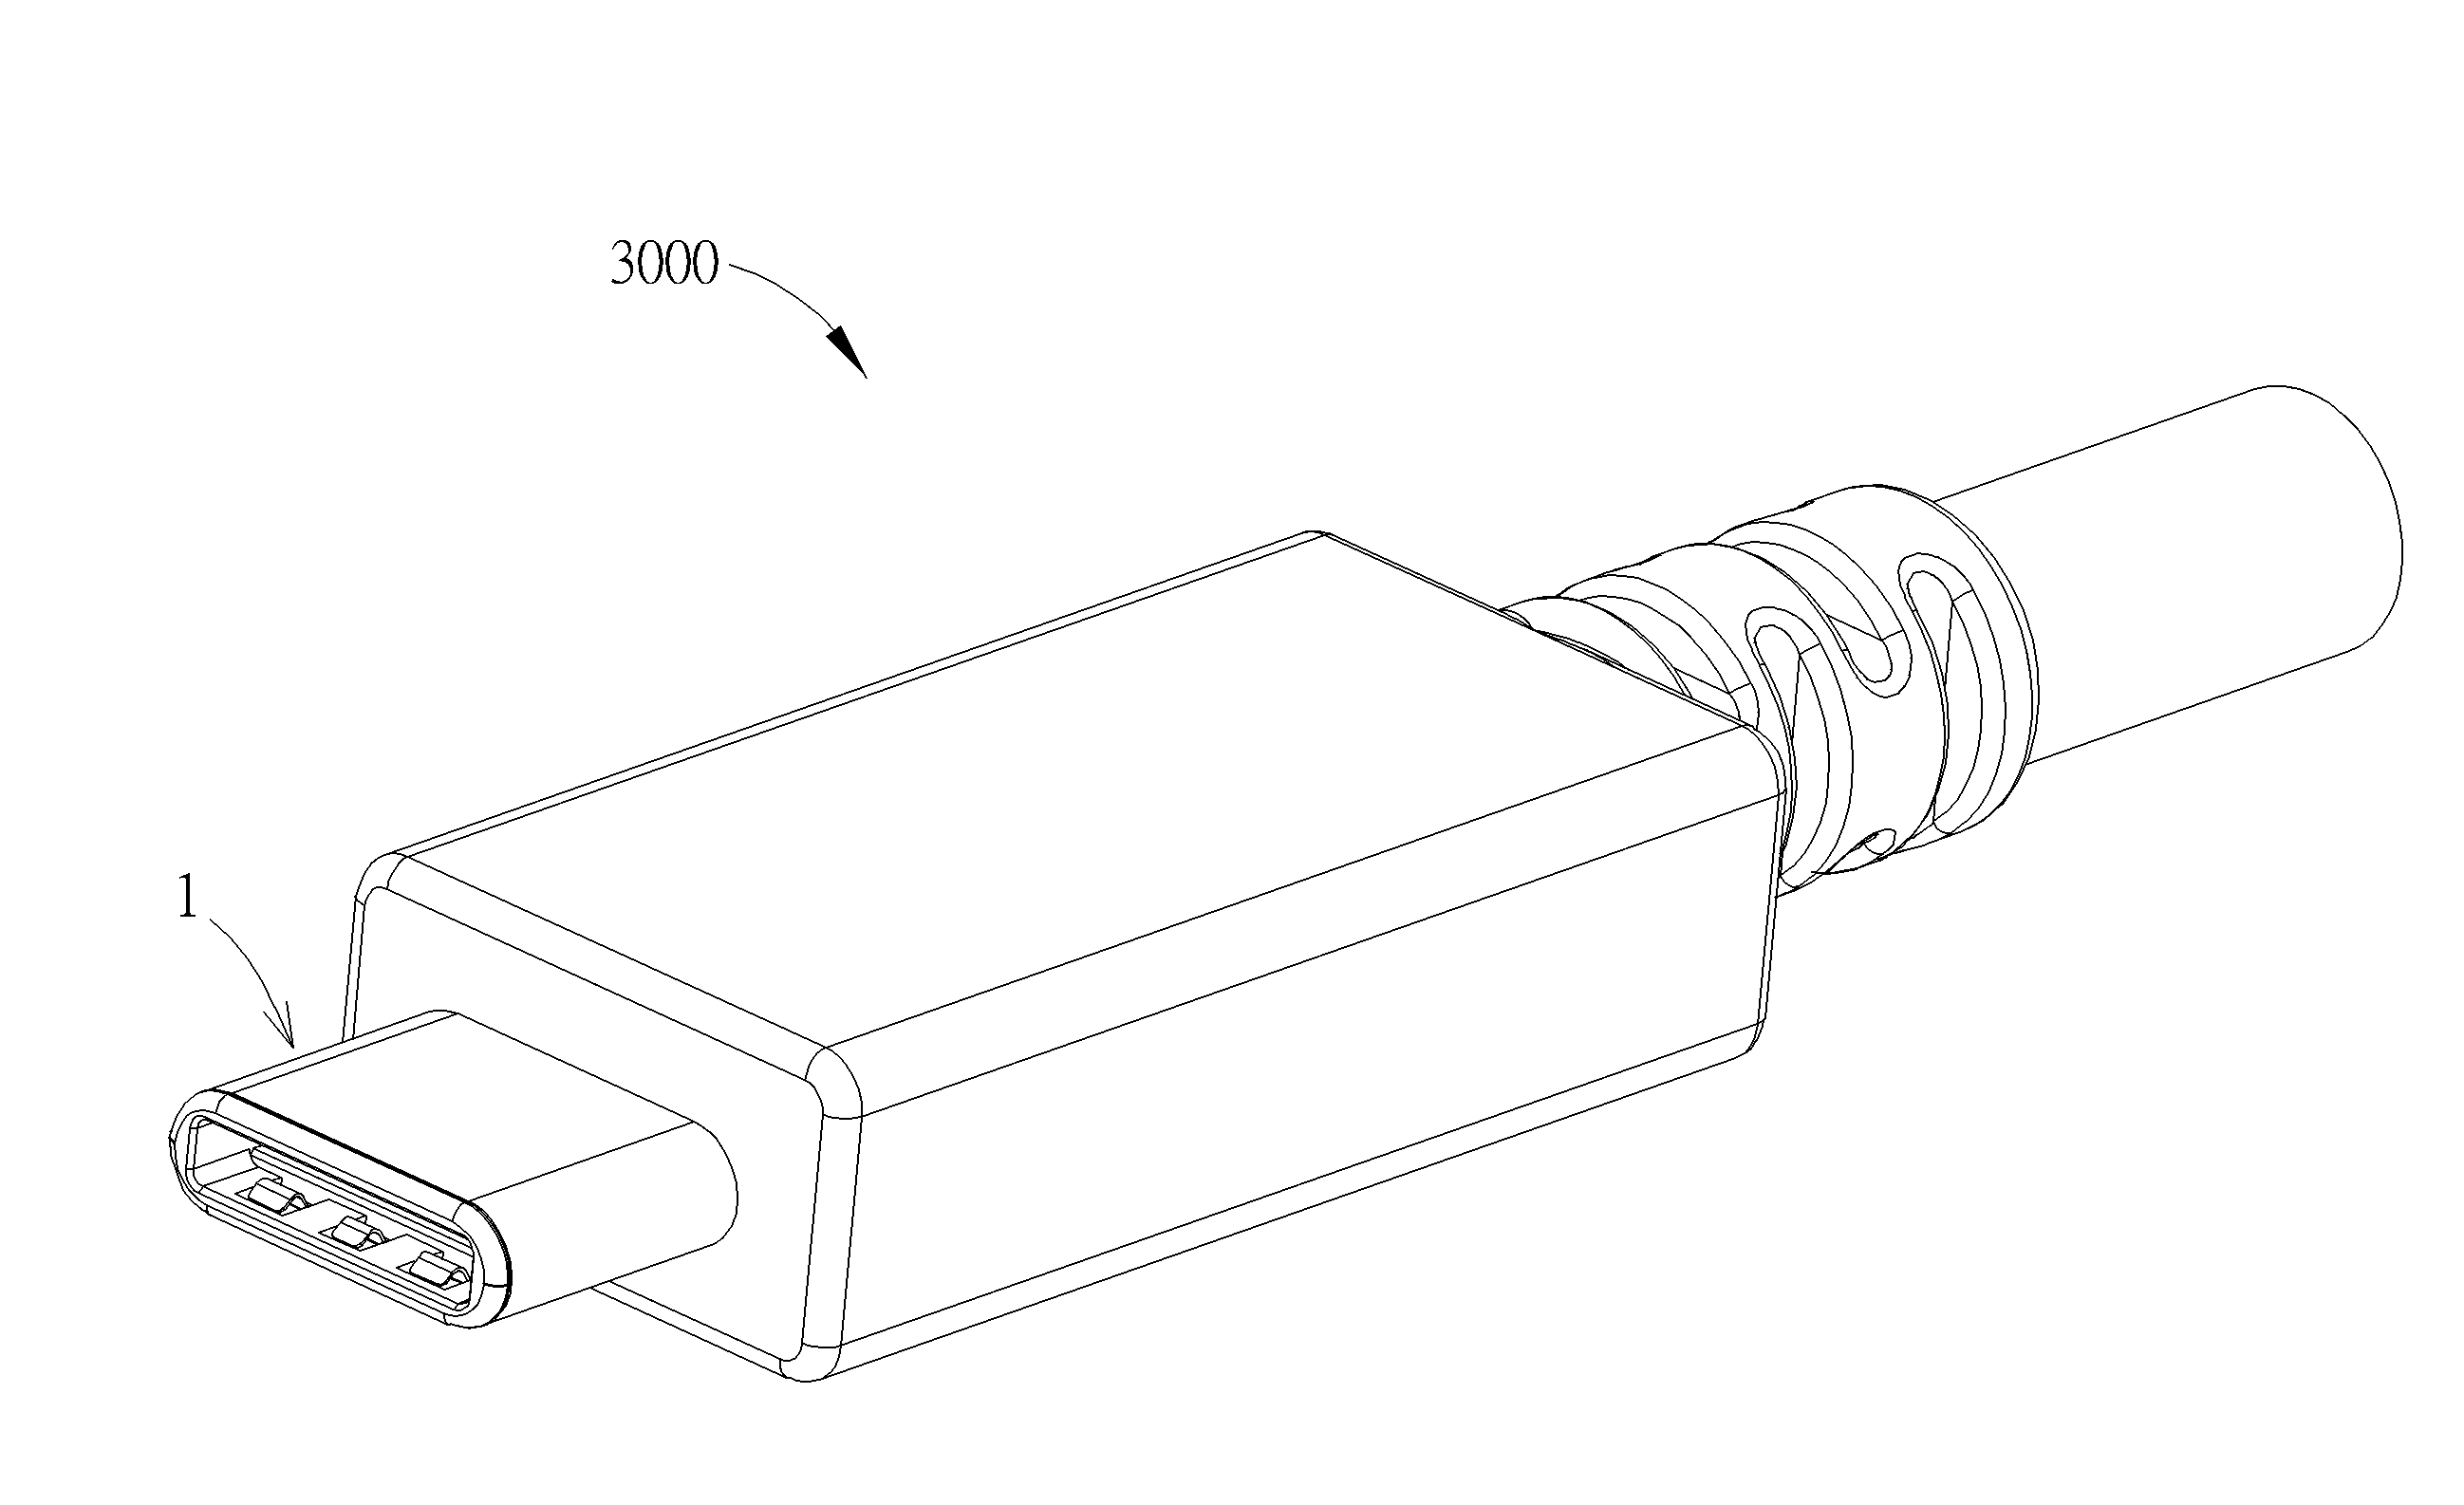 Electrical plug connector with shielding and grounding features